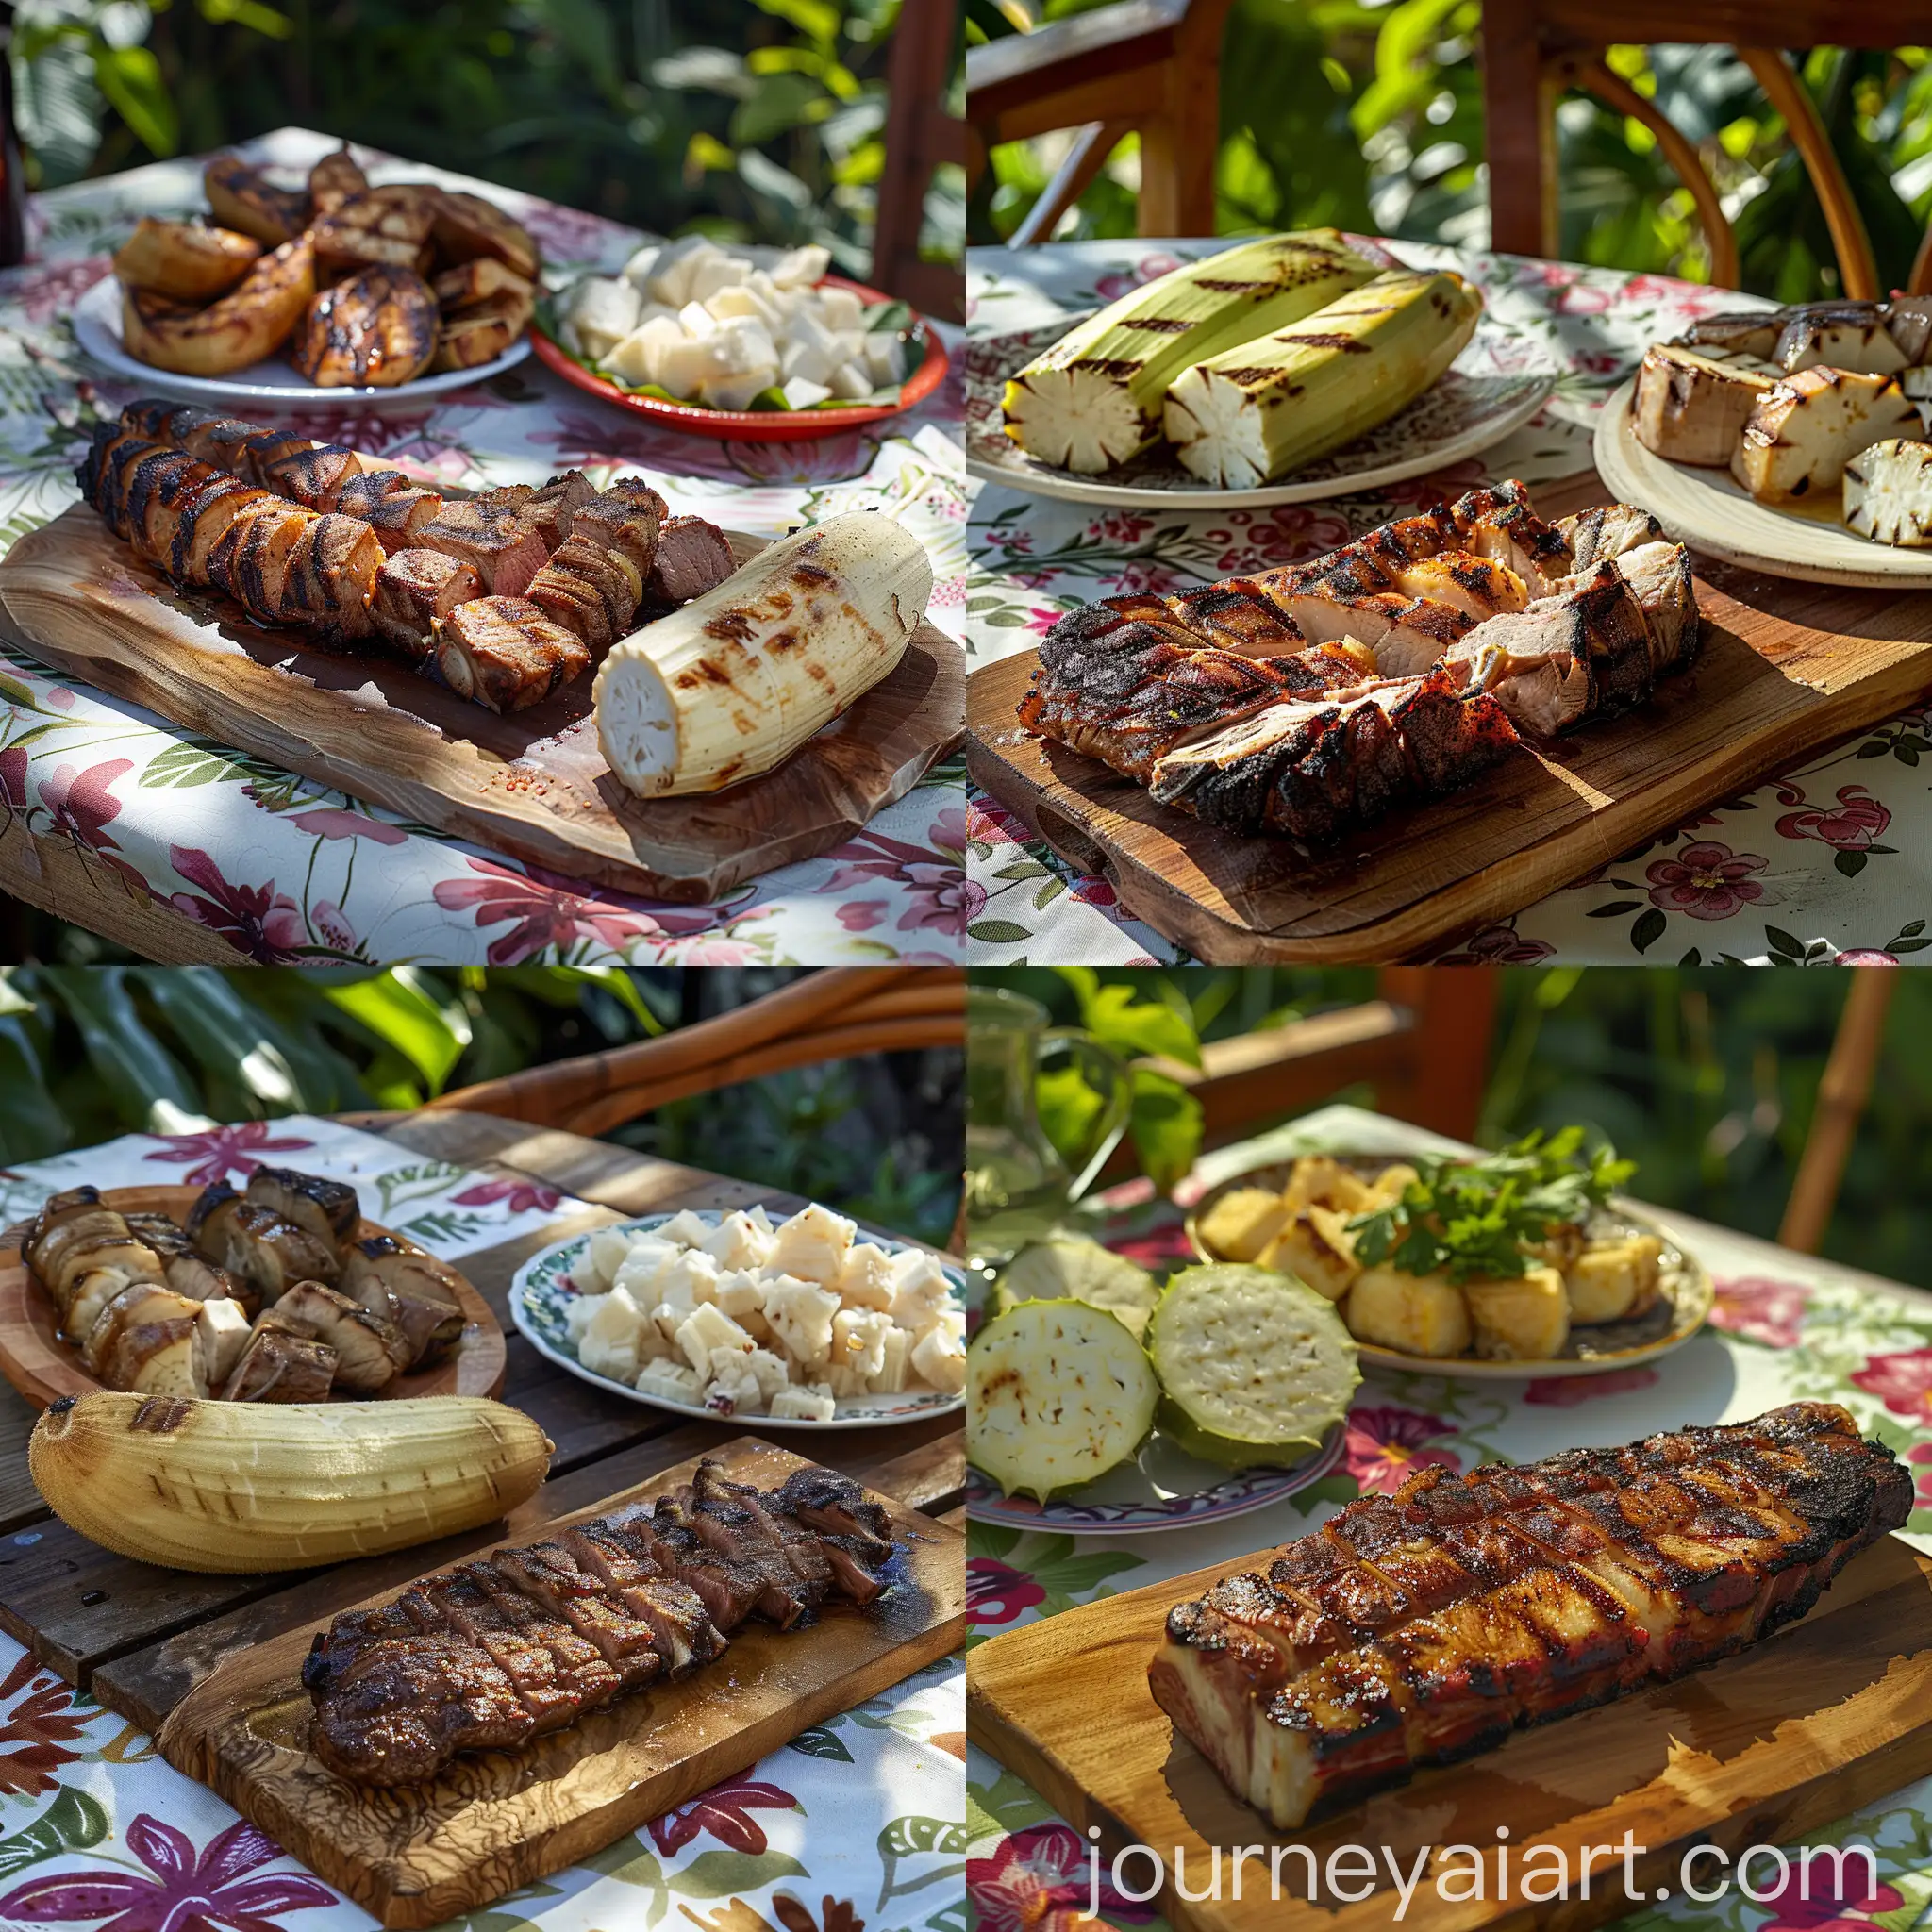 Sizzling-Barbecue-Delight-Grilled-Meat-and-Cassava-Feast